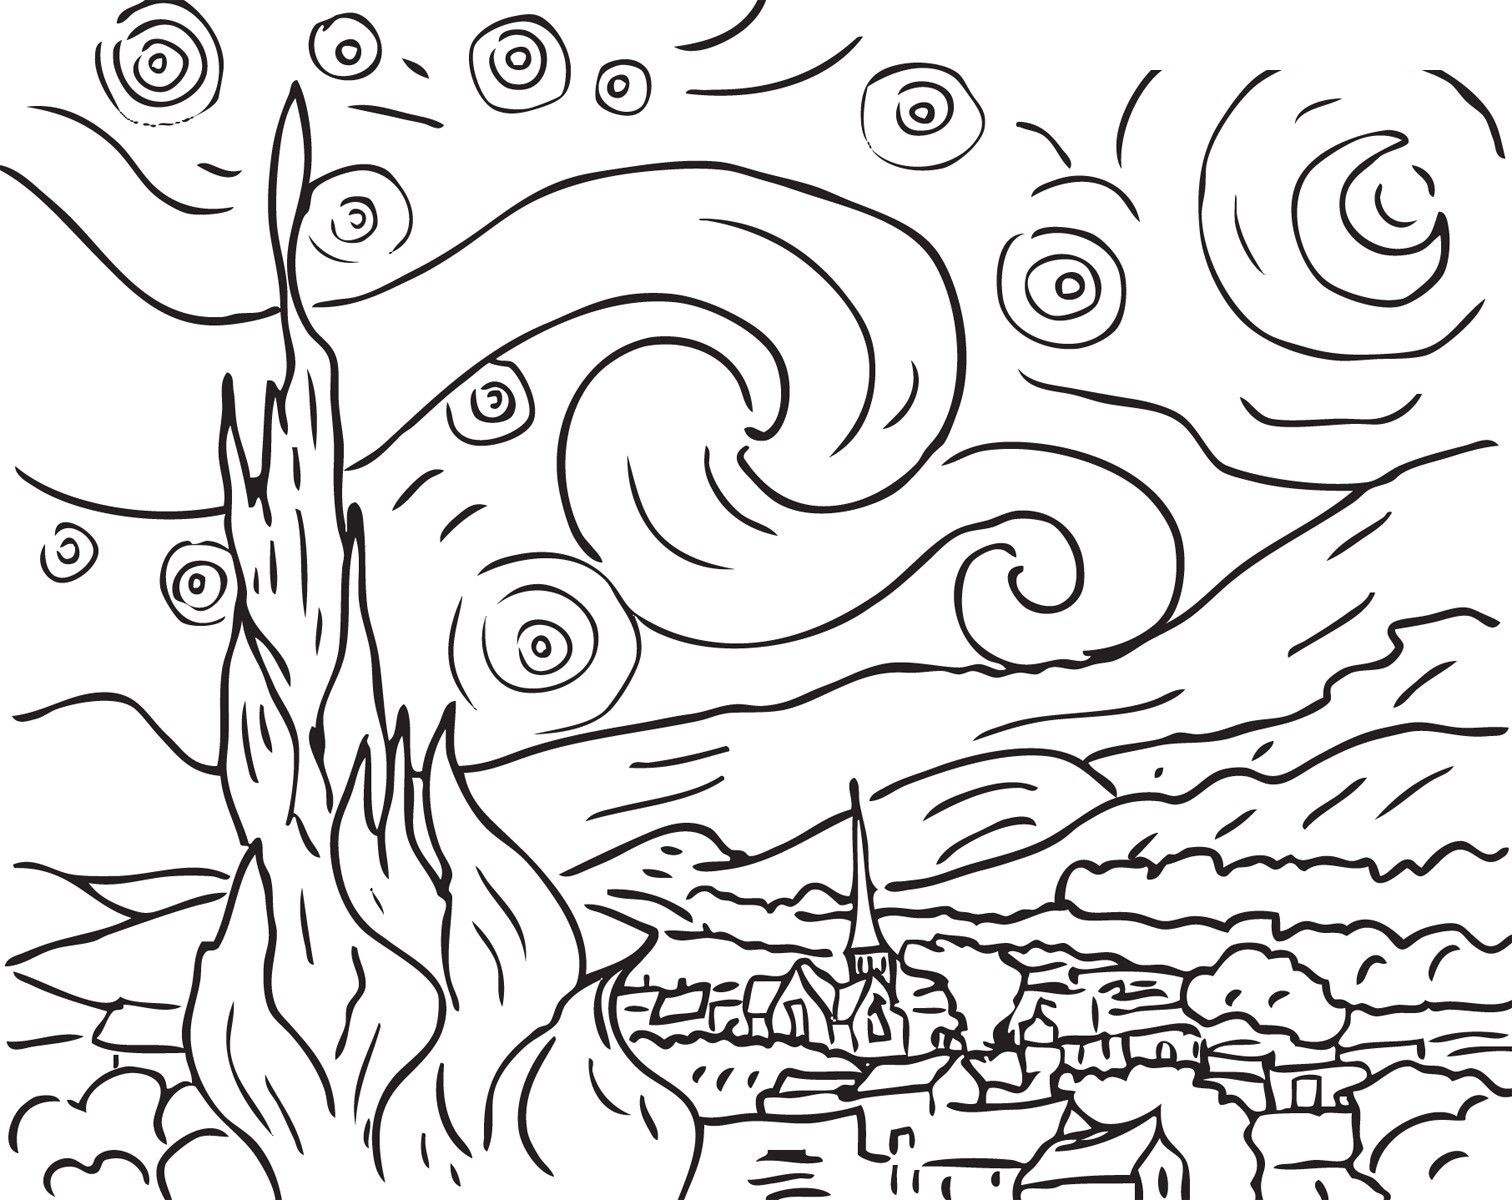 Coloring Pages For Older Kids - 123 Free Coloring Pages